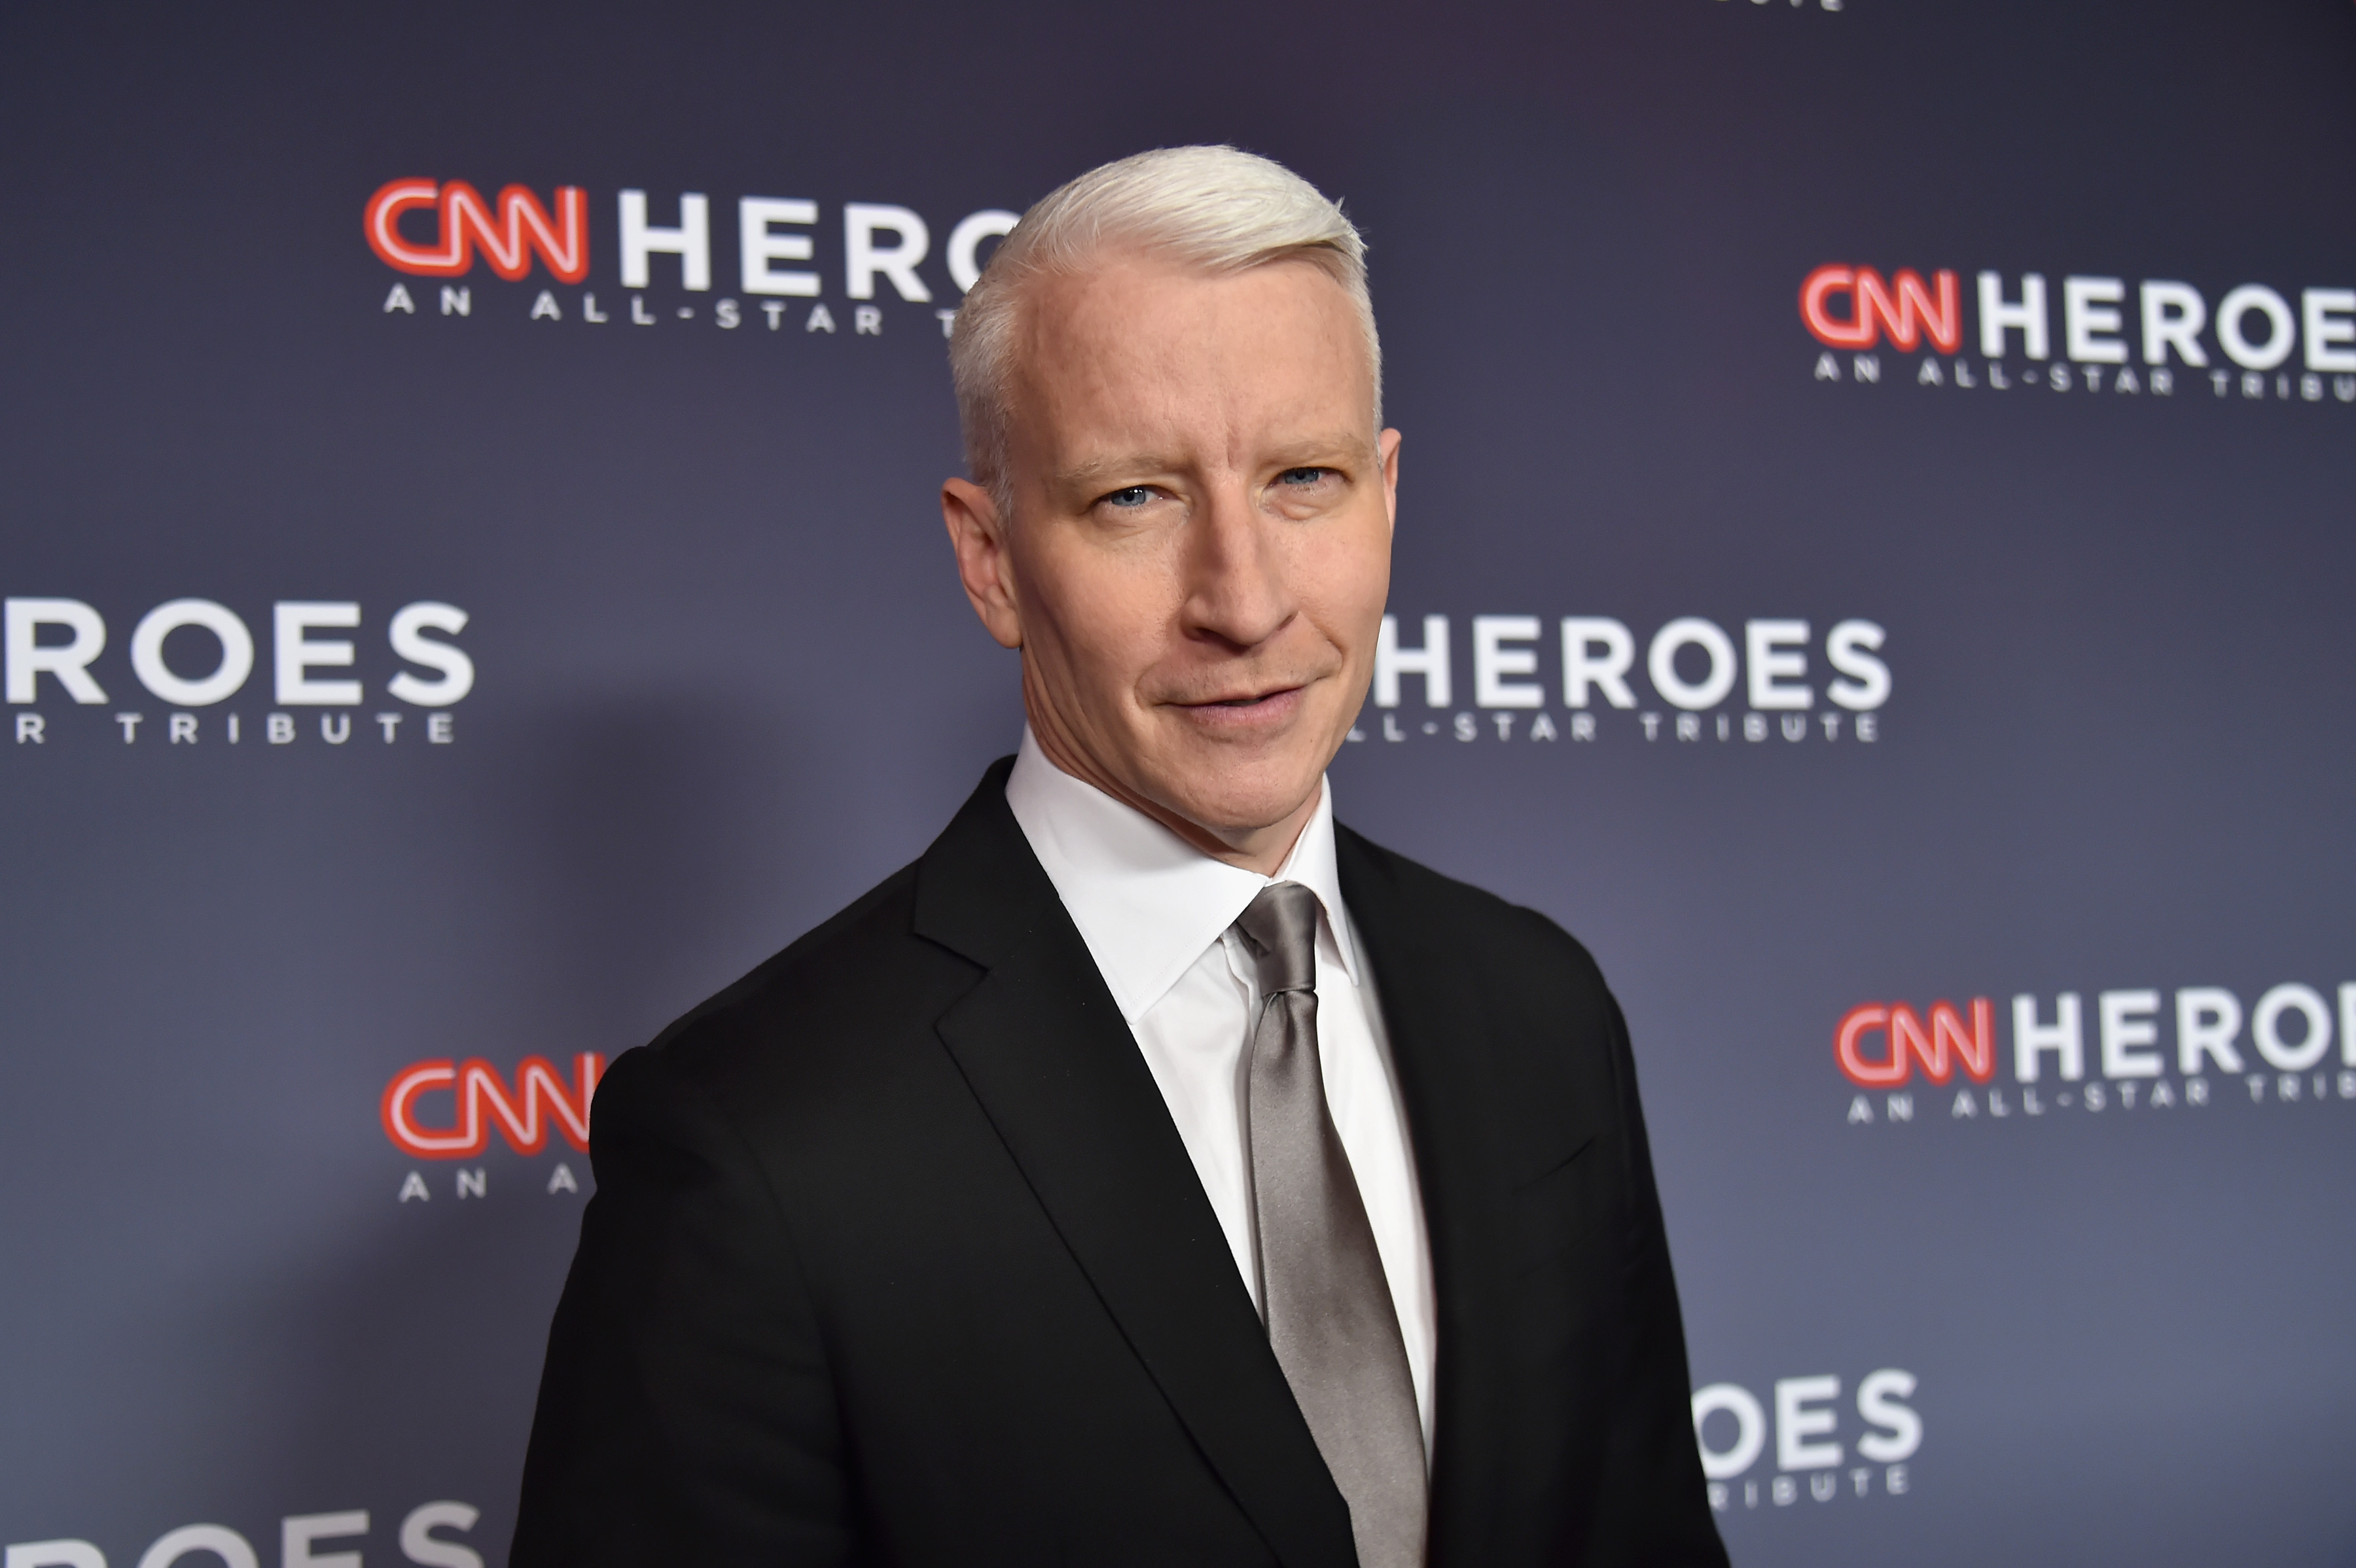 Anderson Cooper attends CNN Heroes 2017 at the American Museum of Natural History on December 17, 2017 in New York City. 27437_015  (Photo by Kevin Mazur/Getty Images for CNN)